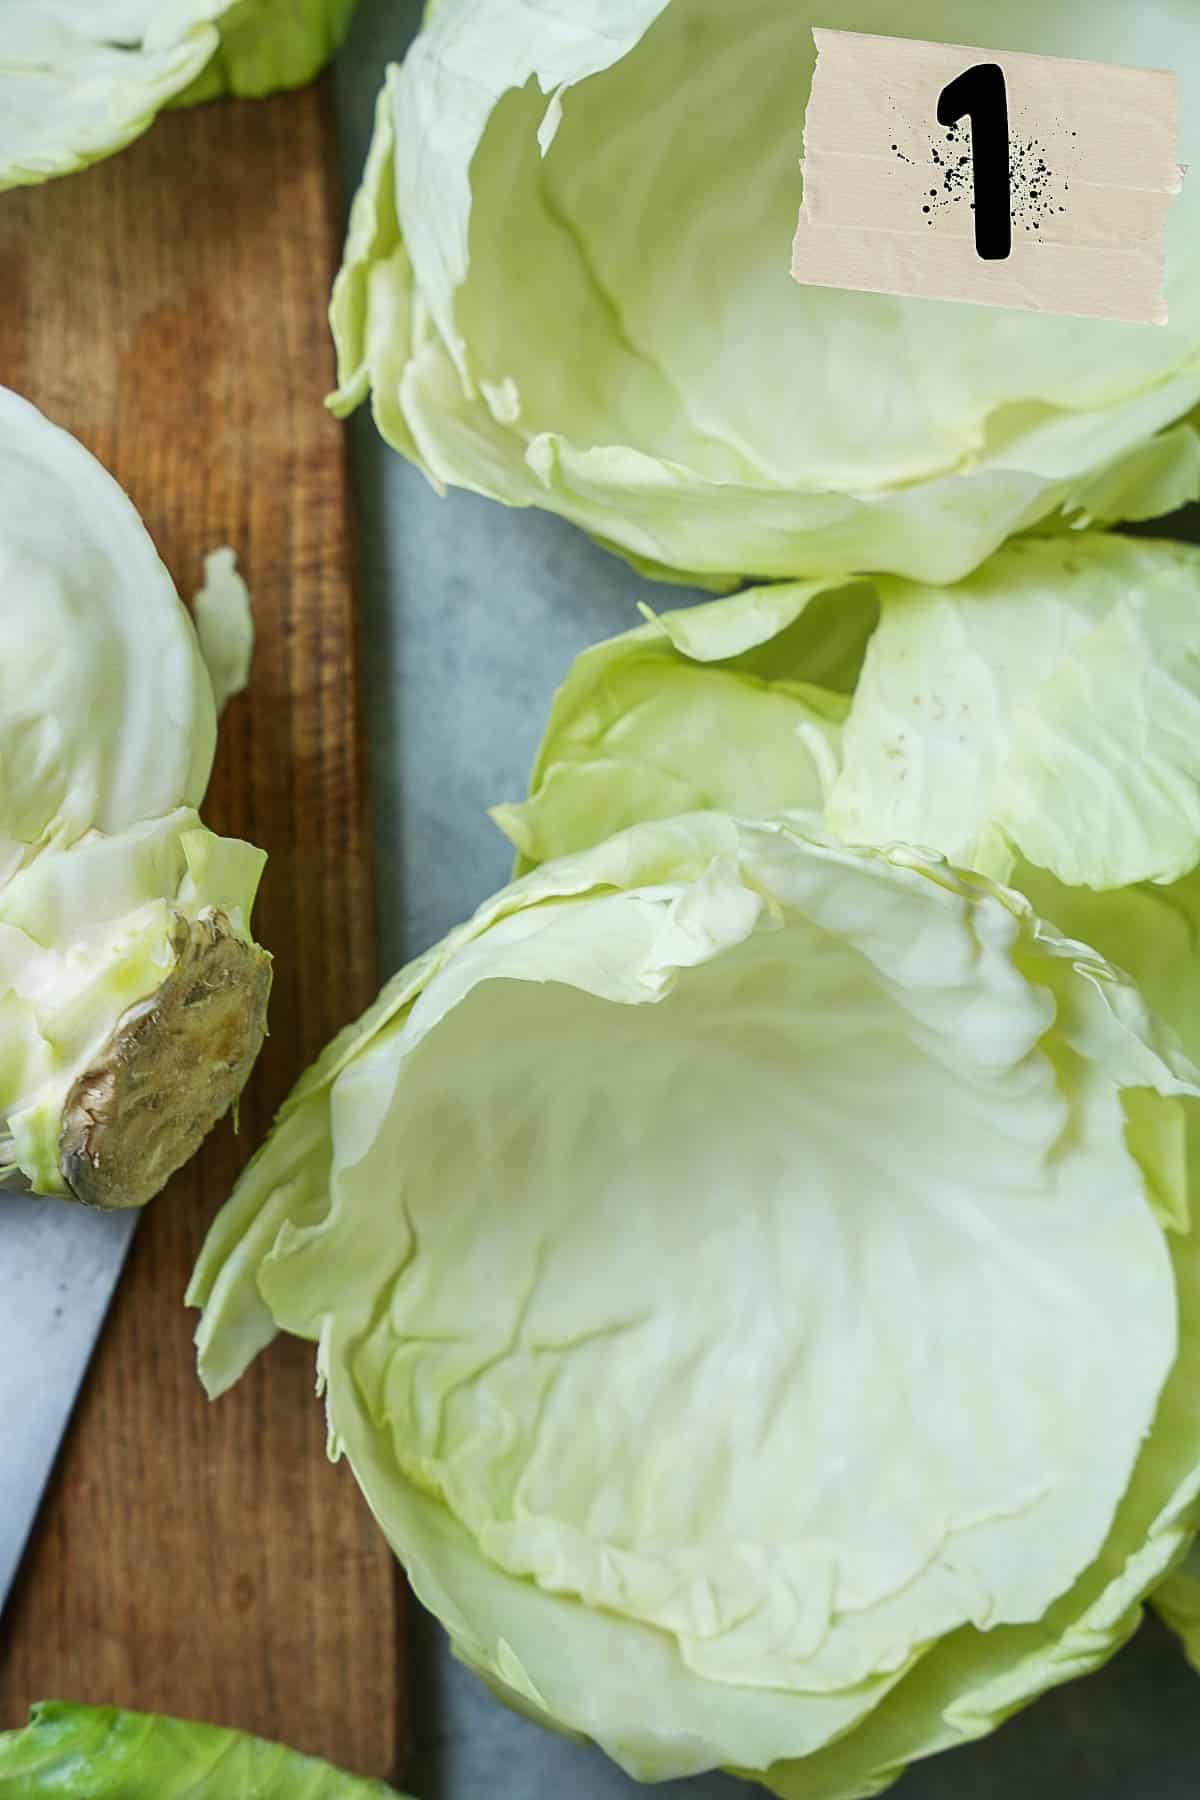 Cabbage leaves are removed one by one from the green cabbage.